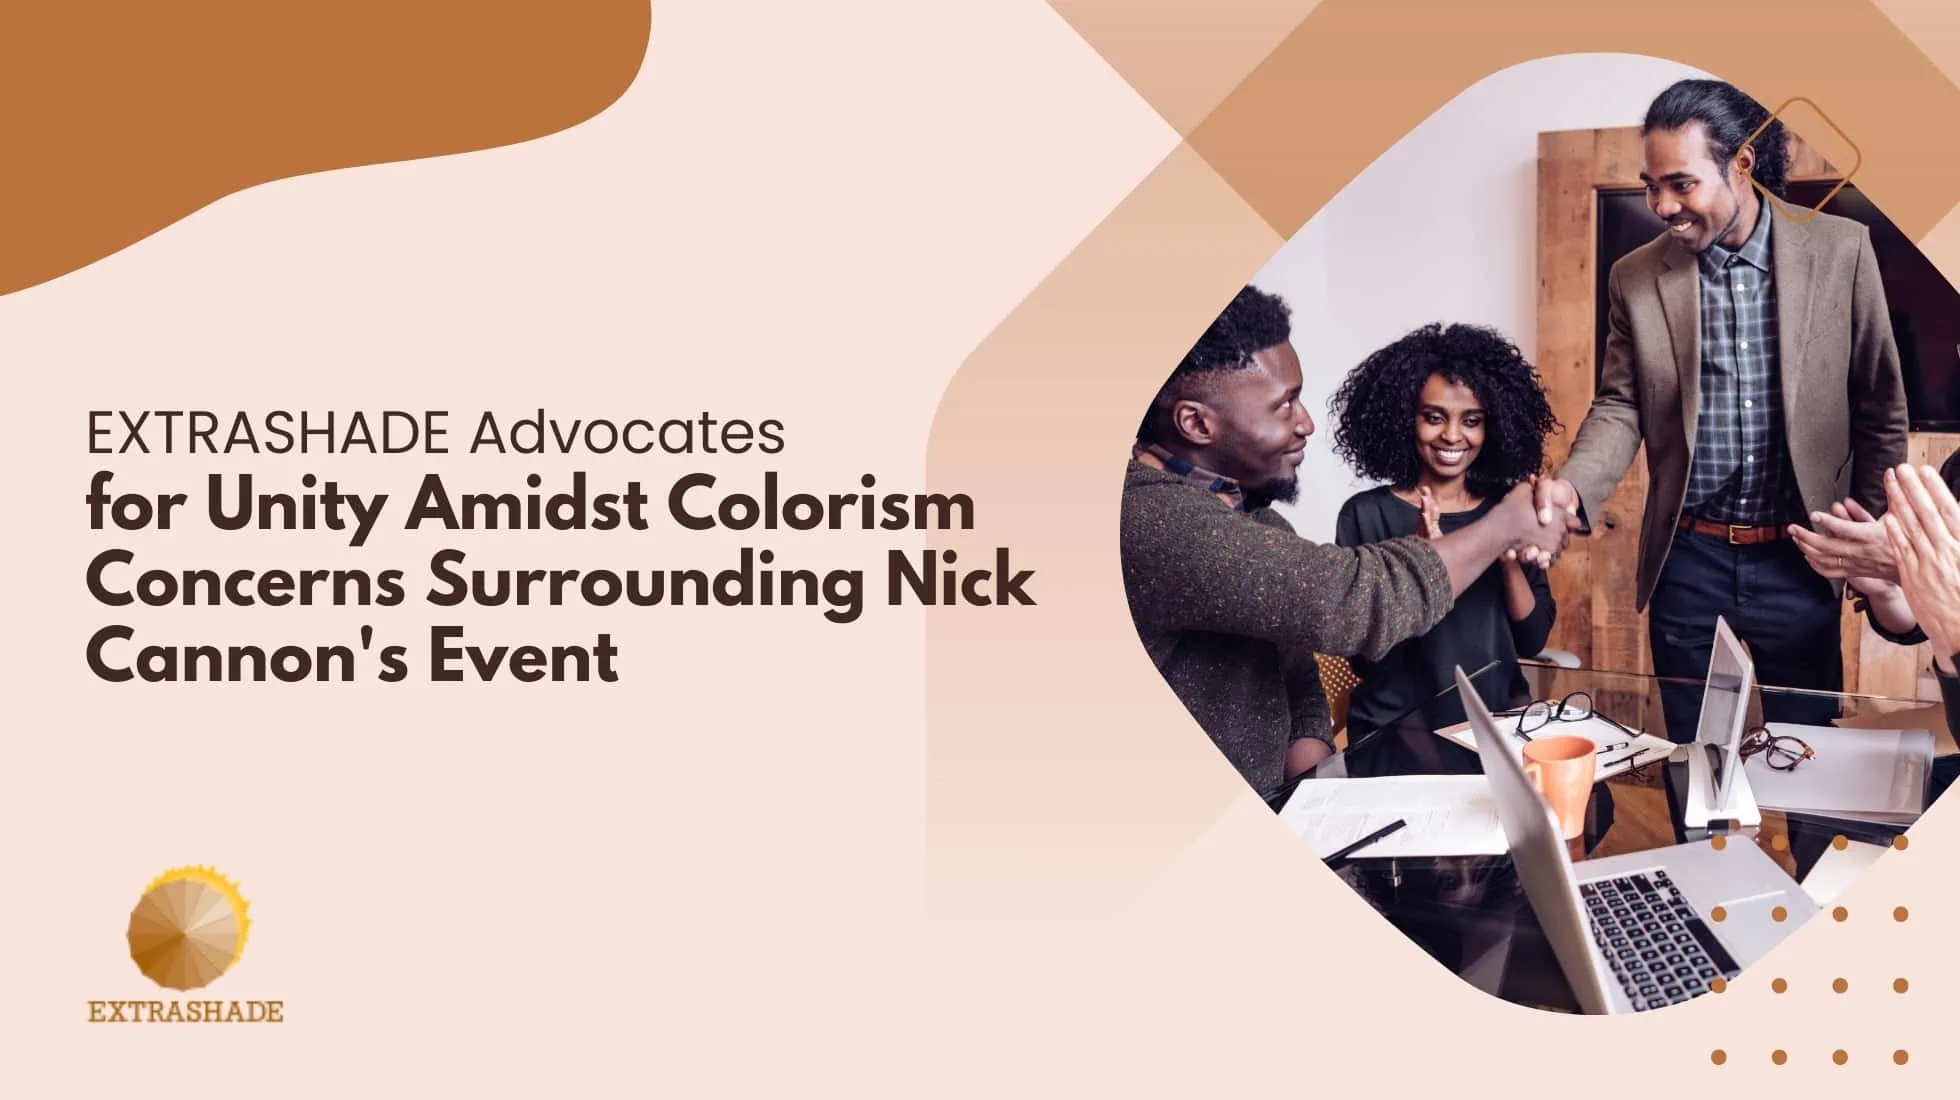 EXTRASHADE Advocates for Unity Amidst Colorism Concerns Surrounding Nick Cannon's Event